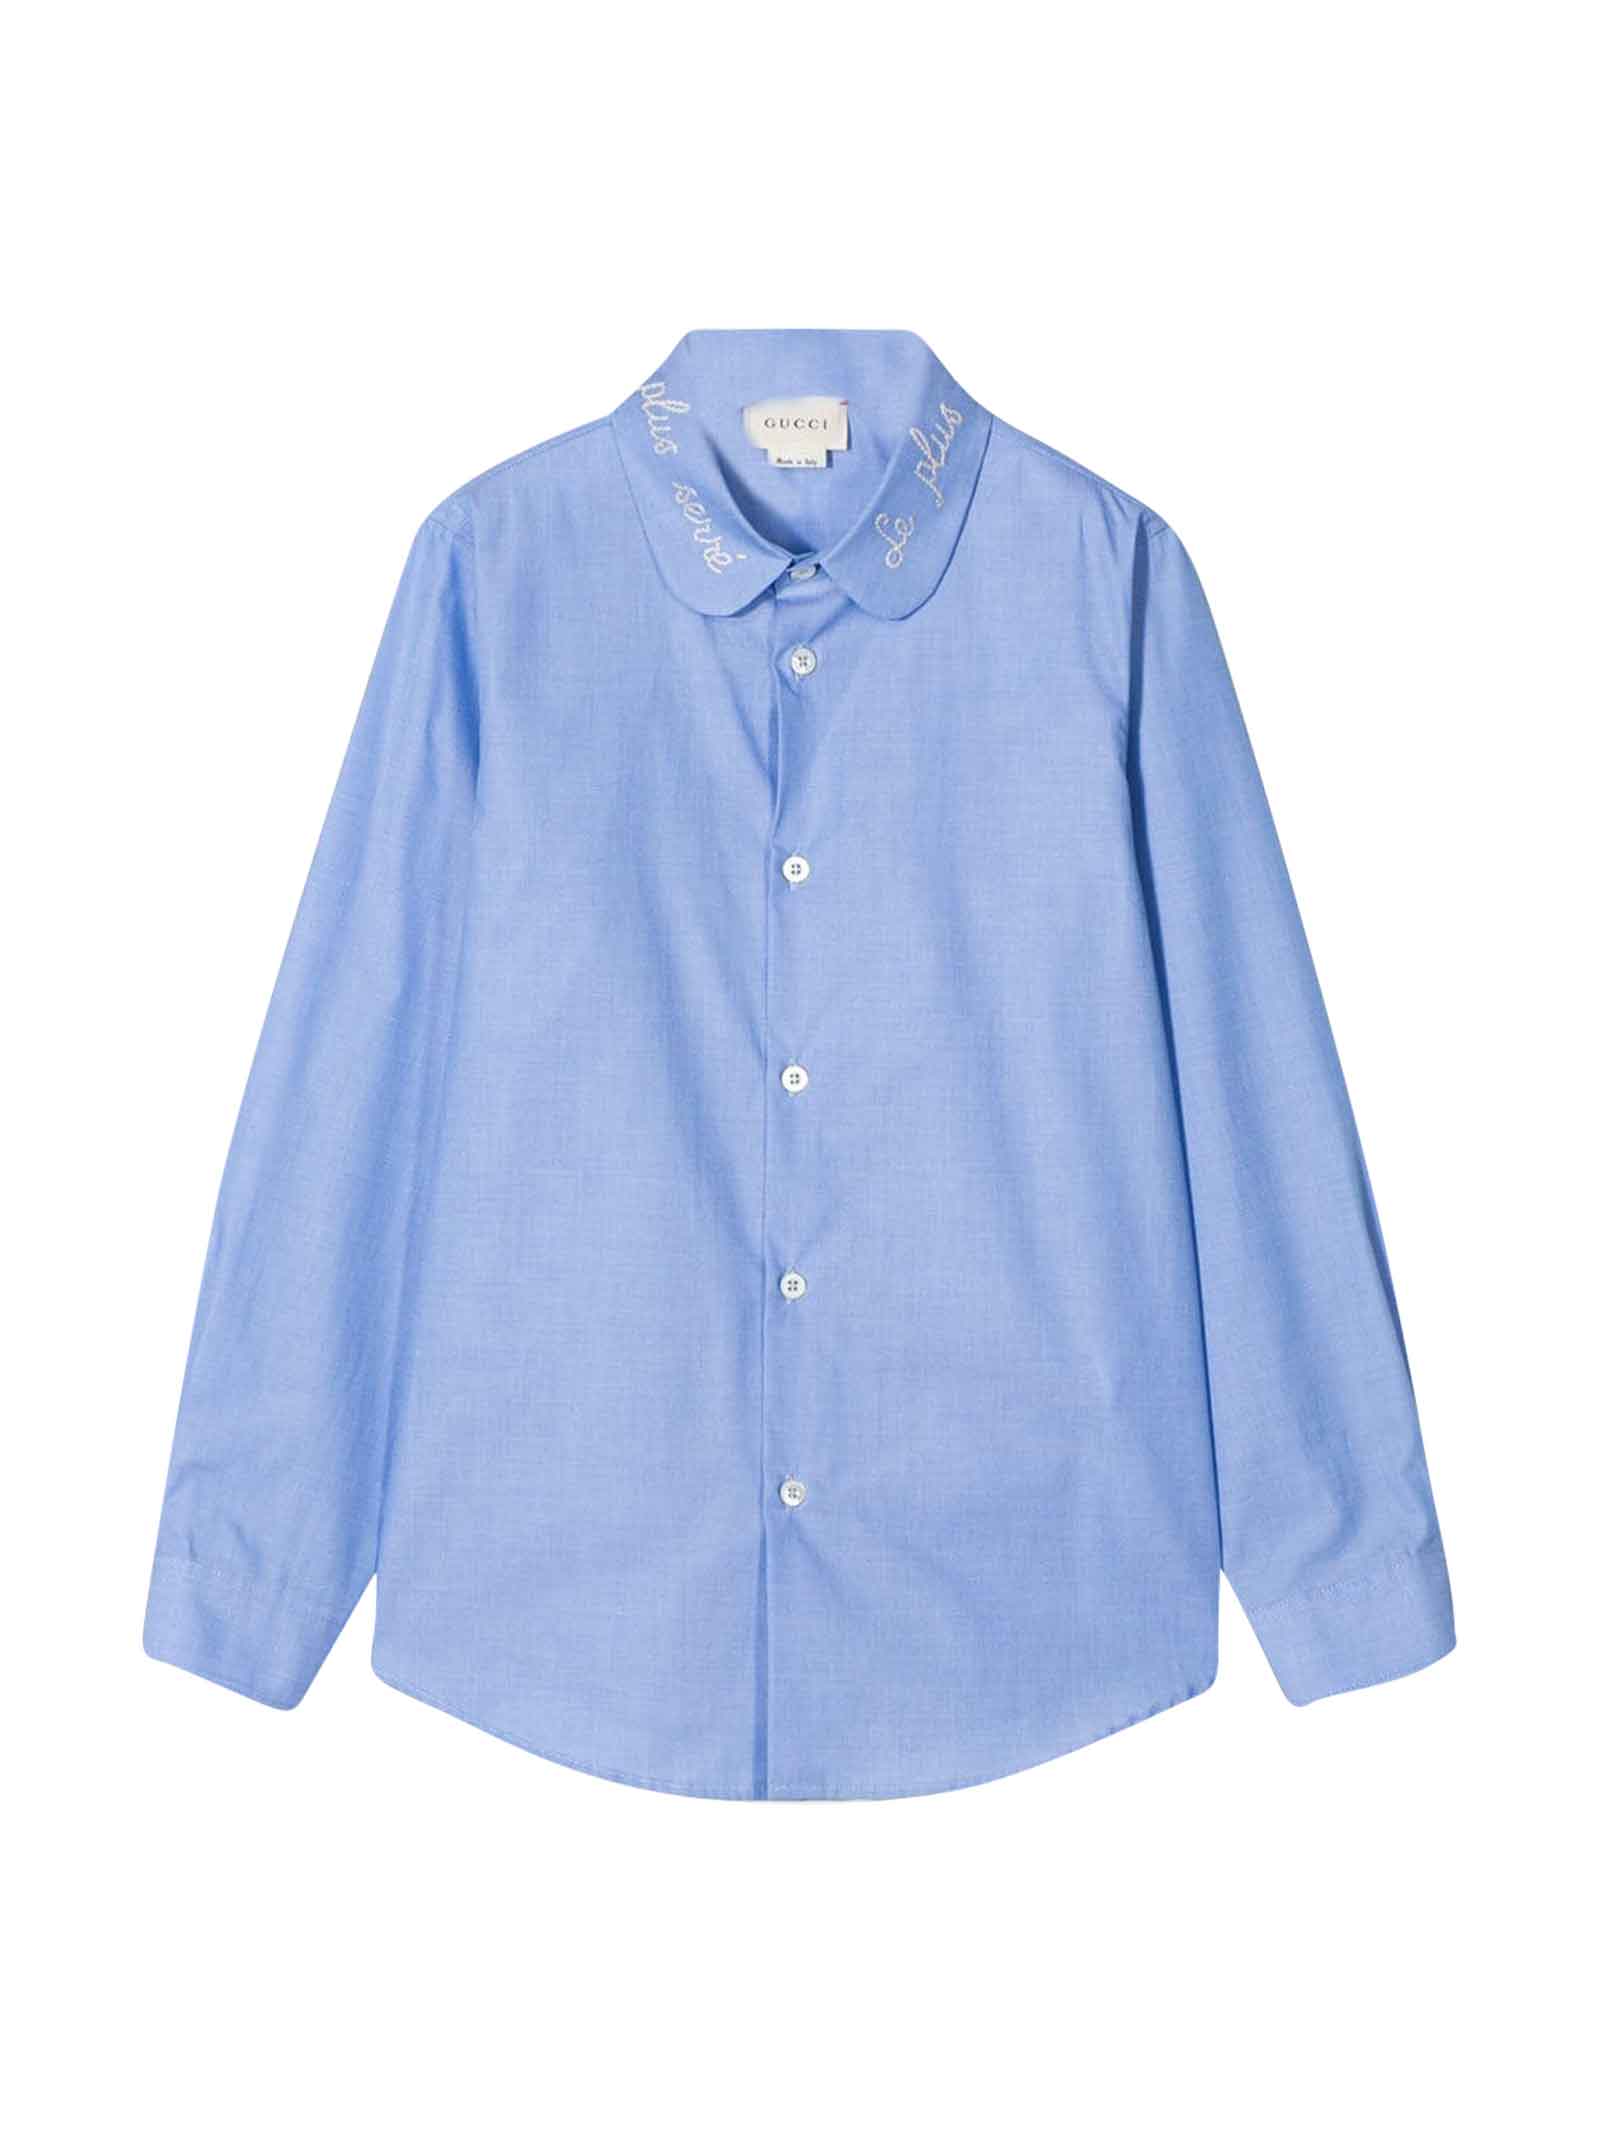 GUCCI BLUE SHIRT WITH EMBROYDED COLLAR,11261169